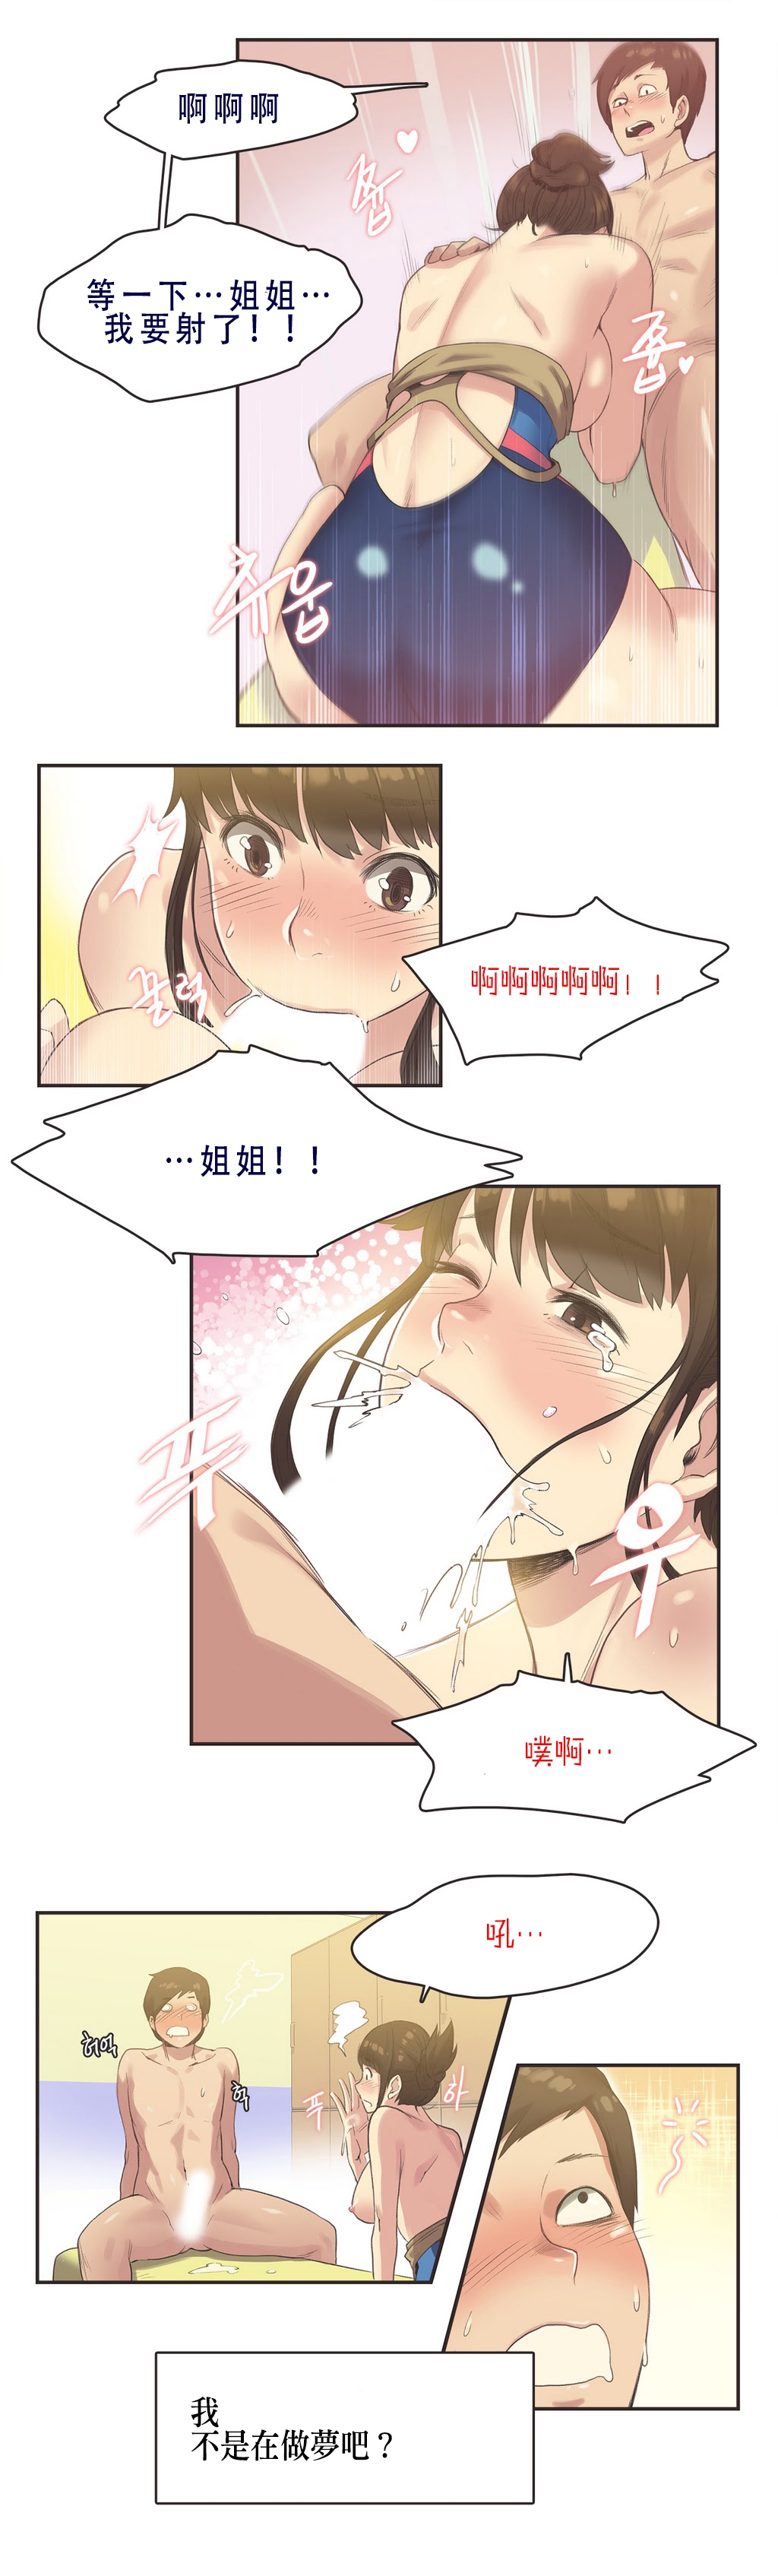 [Gamang] Sports Girl Ch.7 [Chinese] [高麗個人漢化] 13